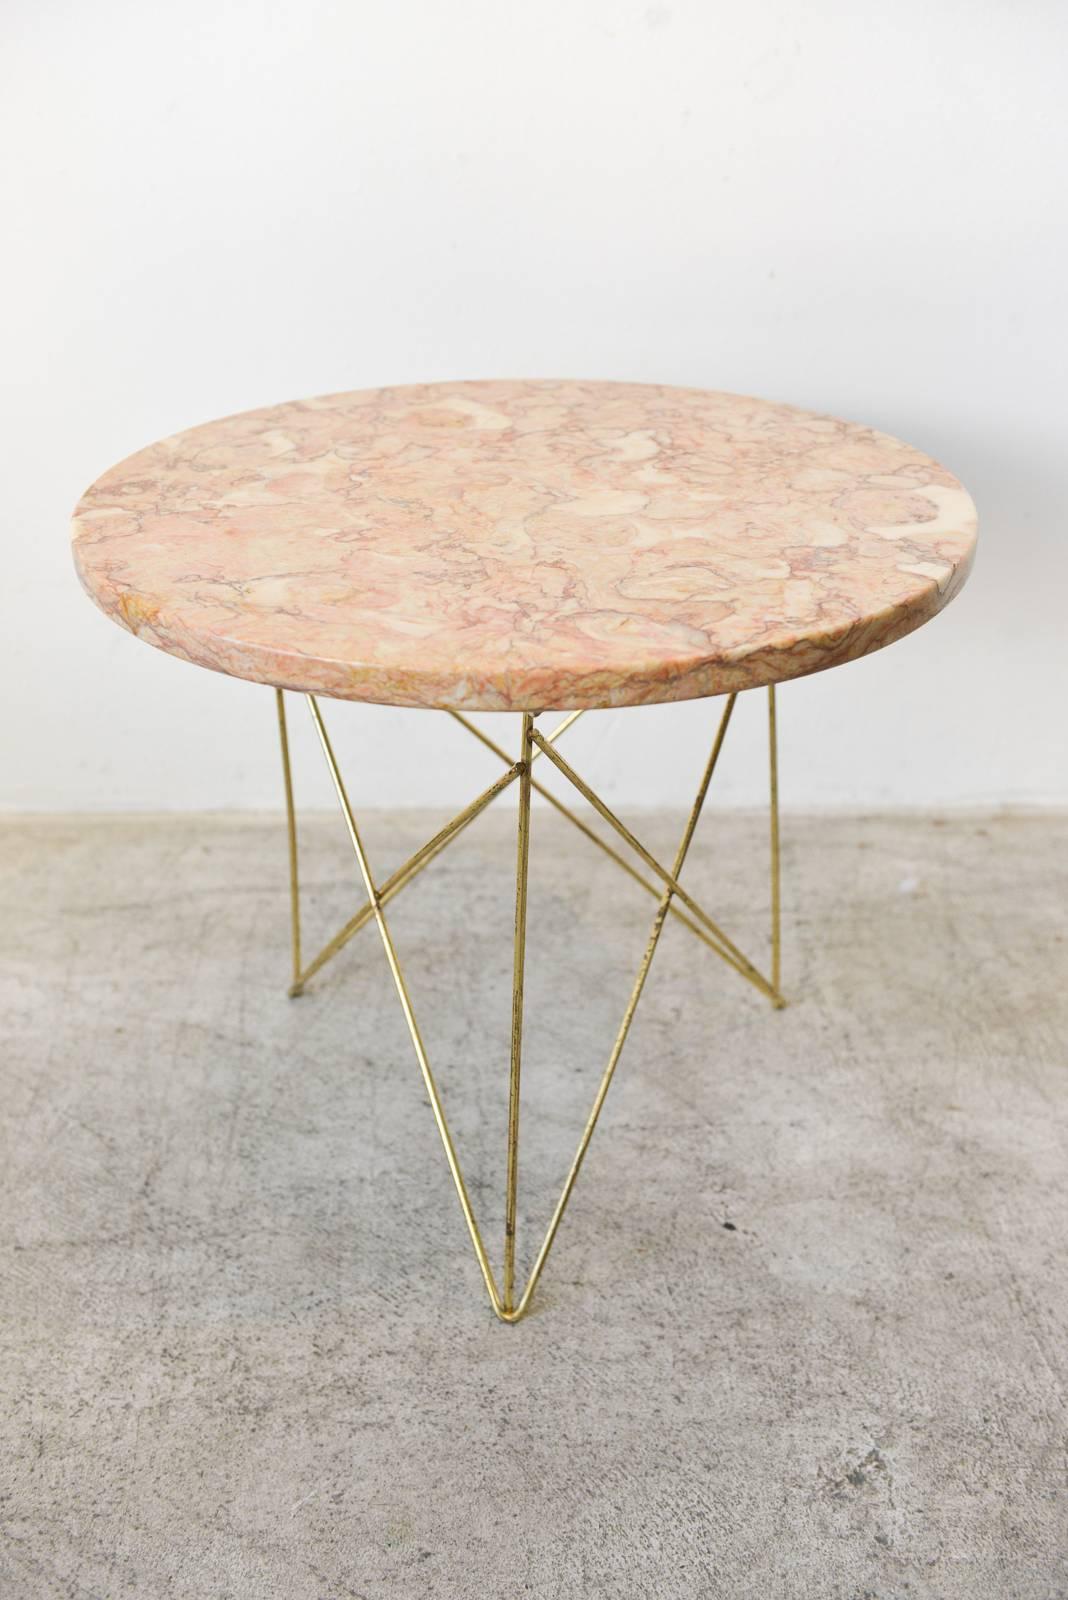 Rene Brancusi marble and brass side or occasional table in beautiful rose marble. Beautiful marble top in very good condition no chips or cracks. Beautiful patina on the brass rod legs. Marble made in Italy. 

Measures 18